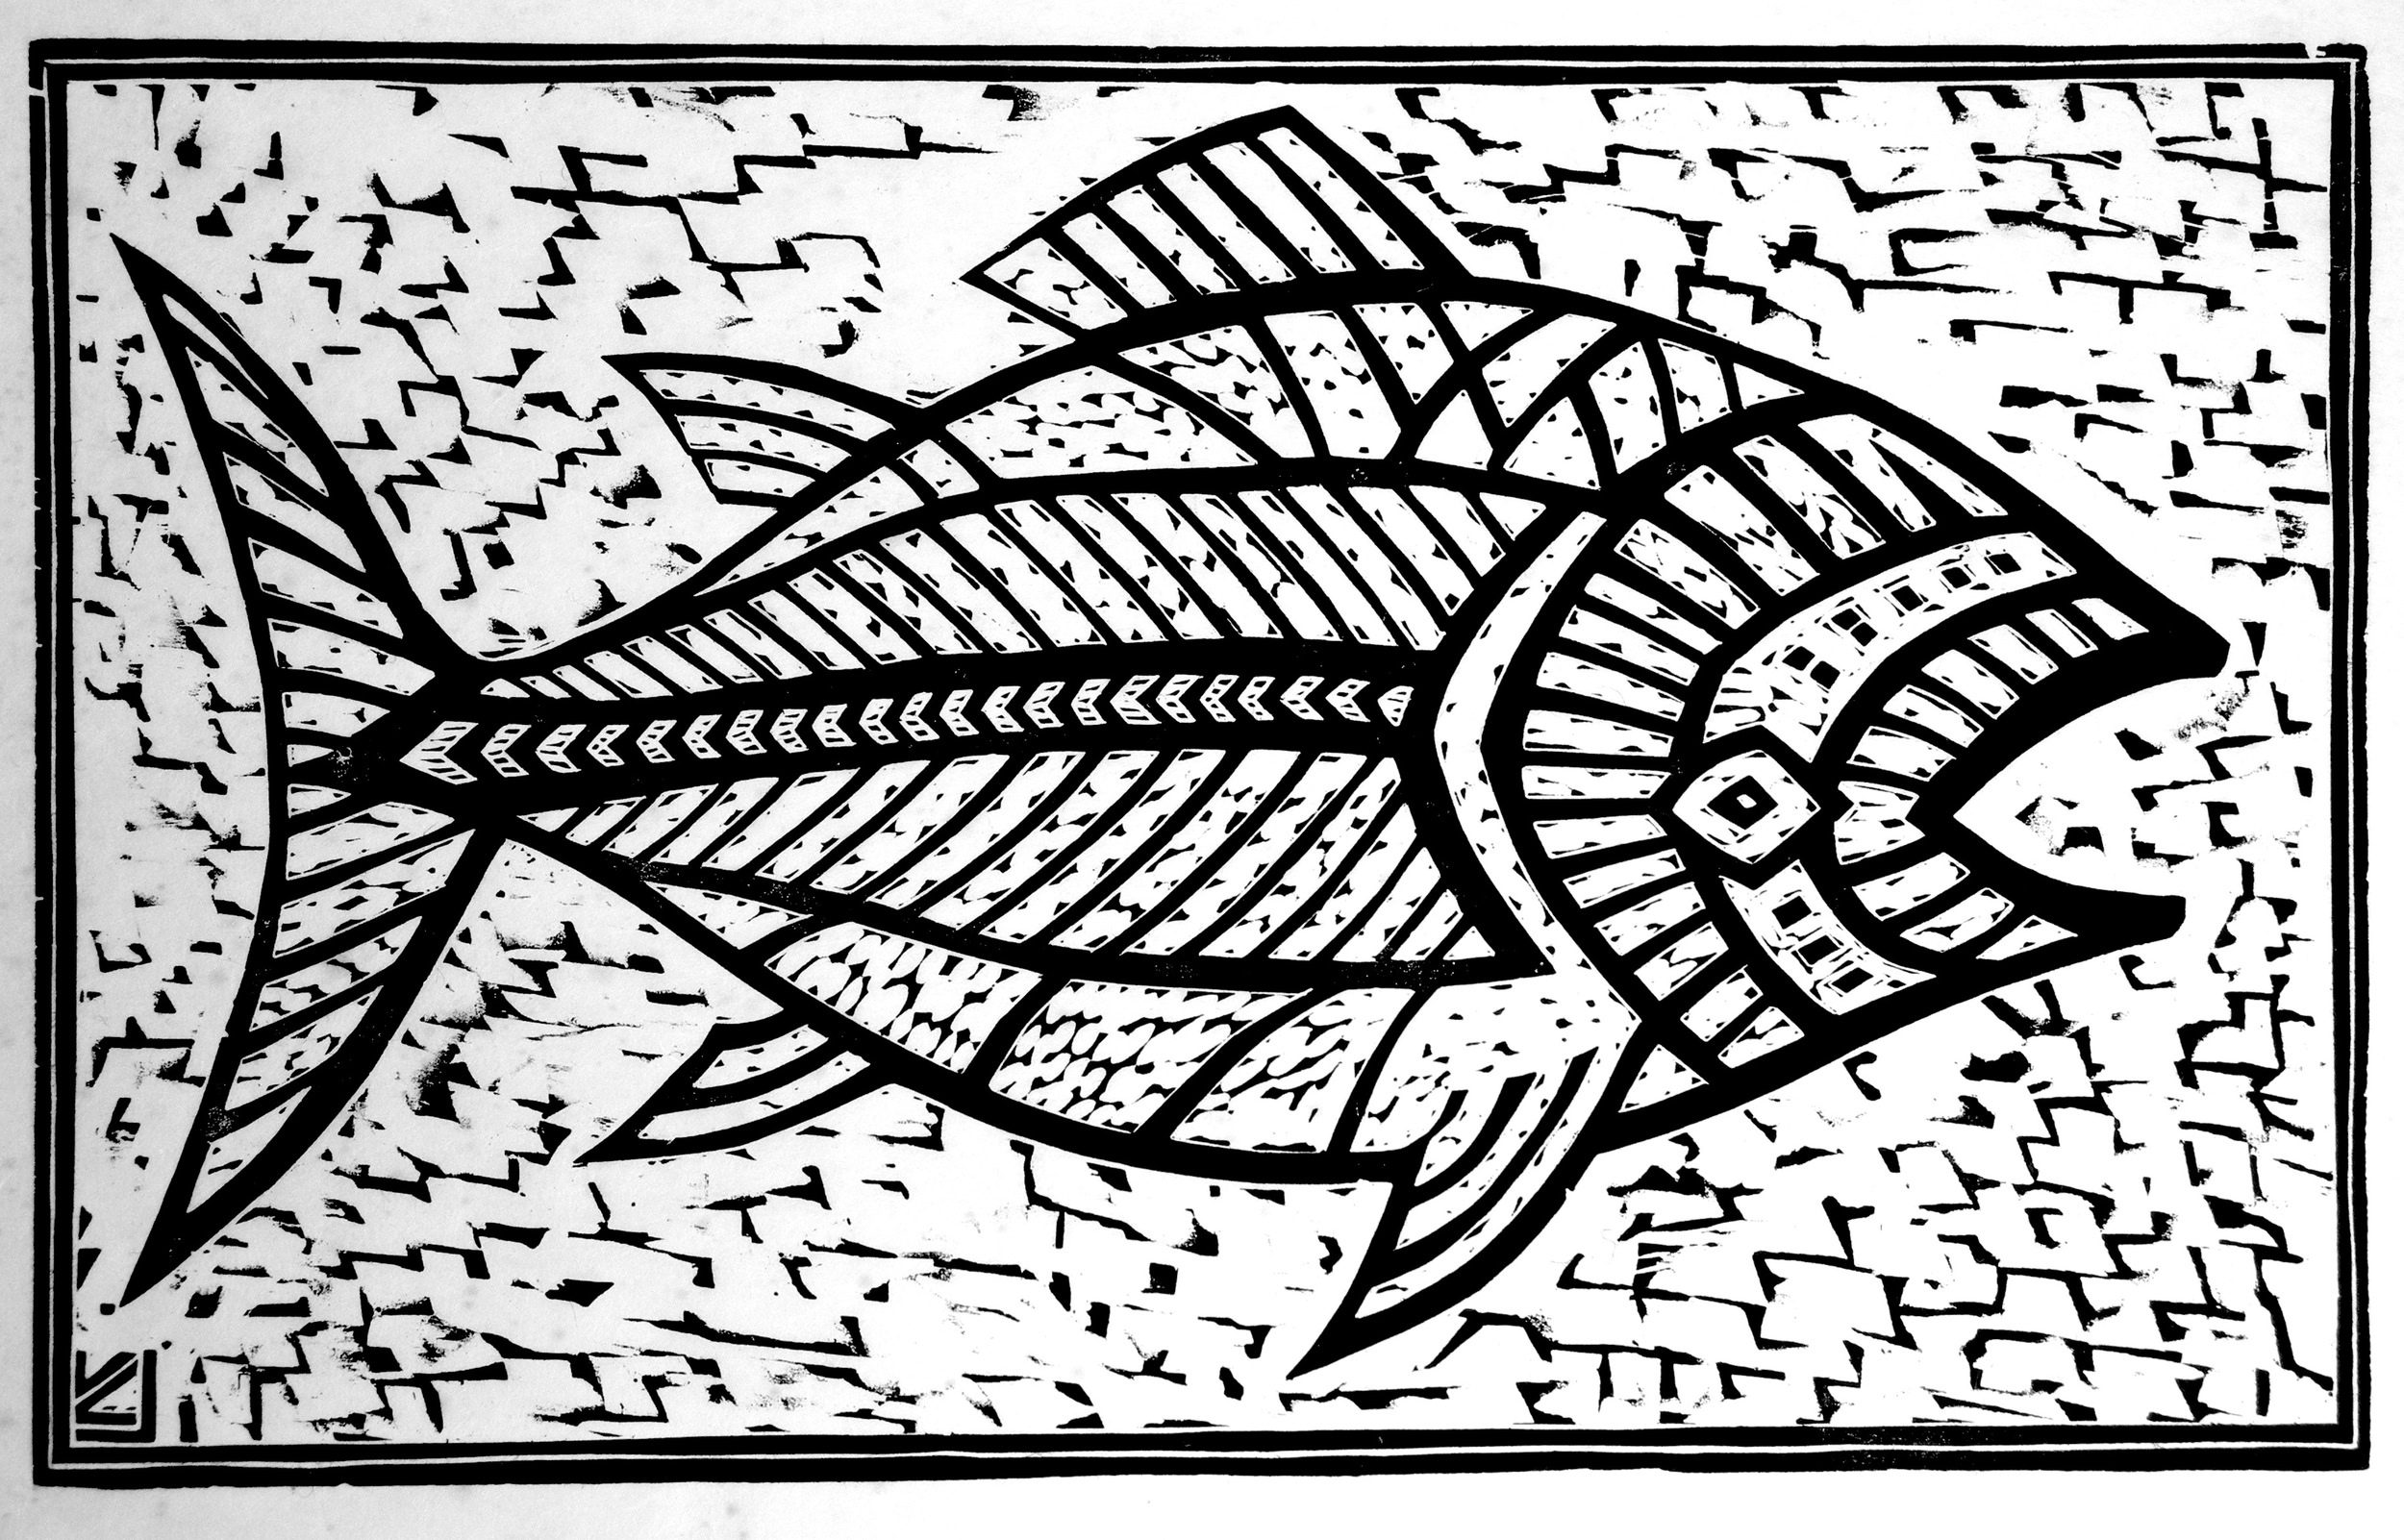 "Fish" by Vernon Courtlandt Johnson. © 1991 VCJ. All rights reserved.